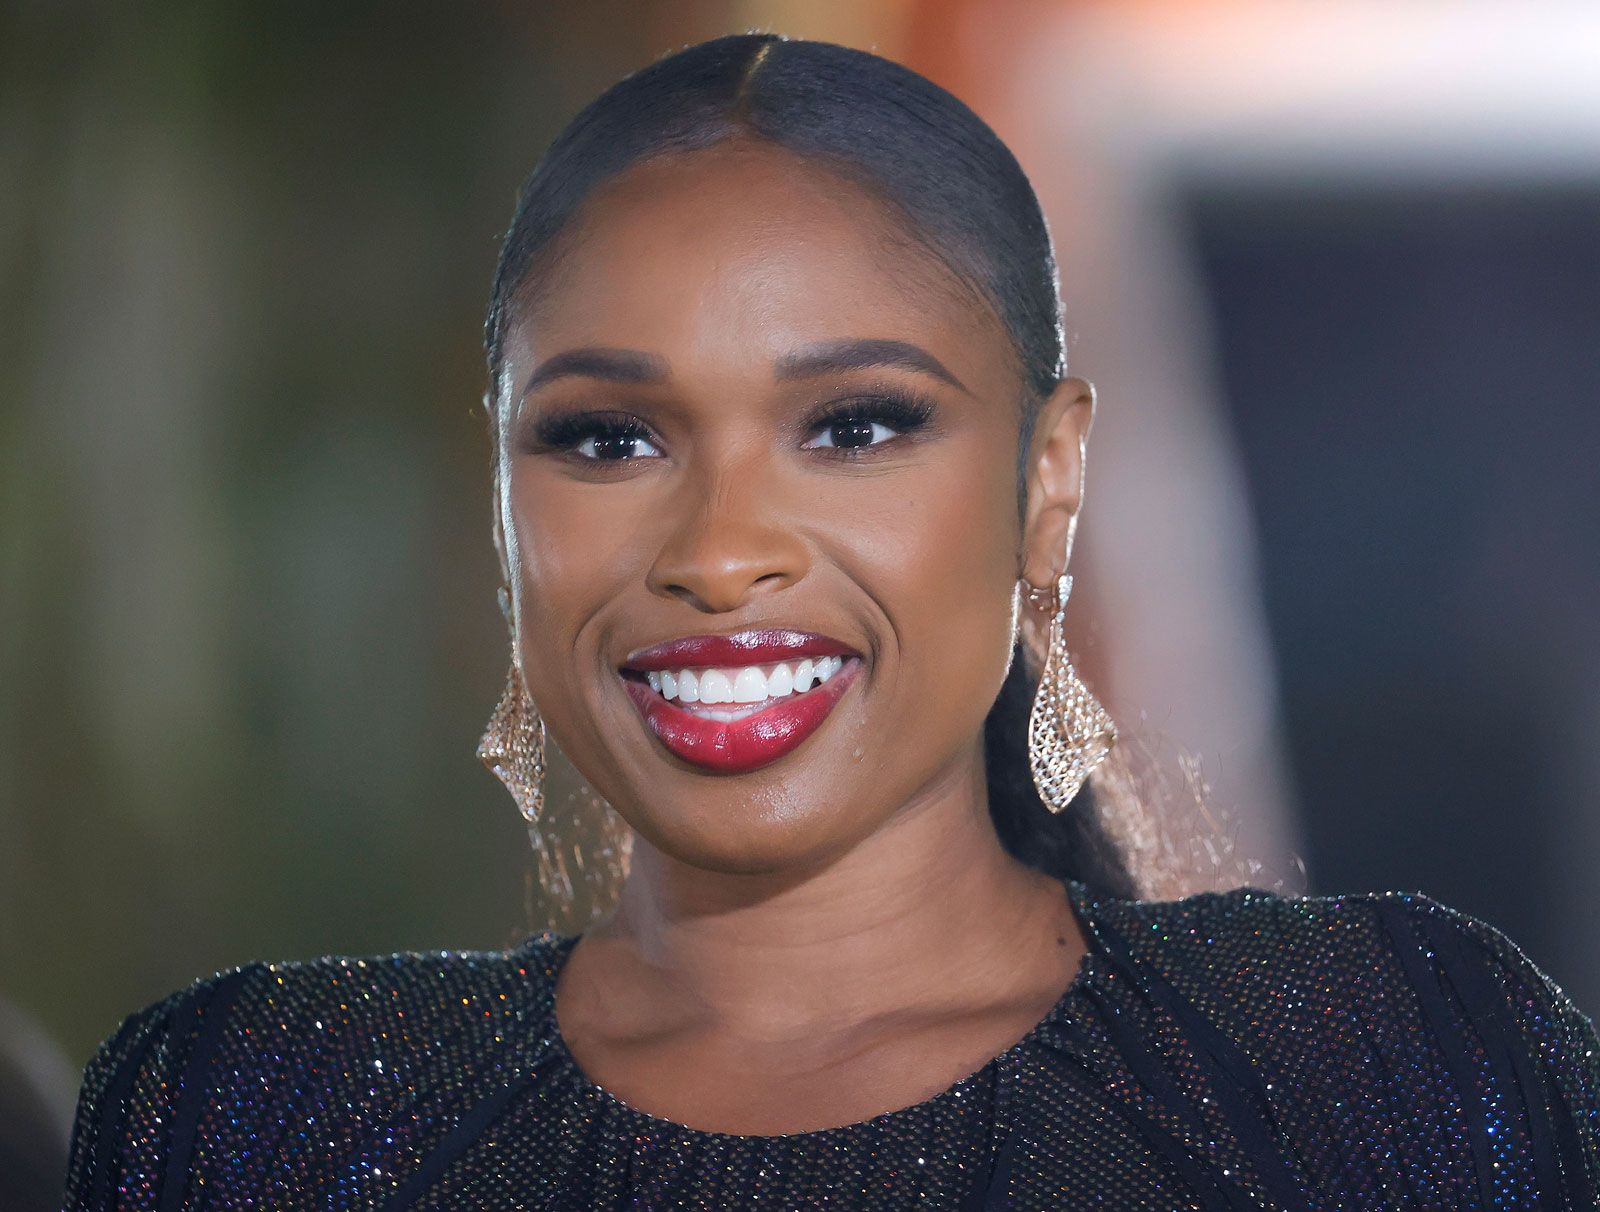 All About Jennifer Hudson: Height, Weight, Bio, and More